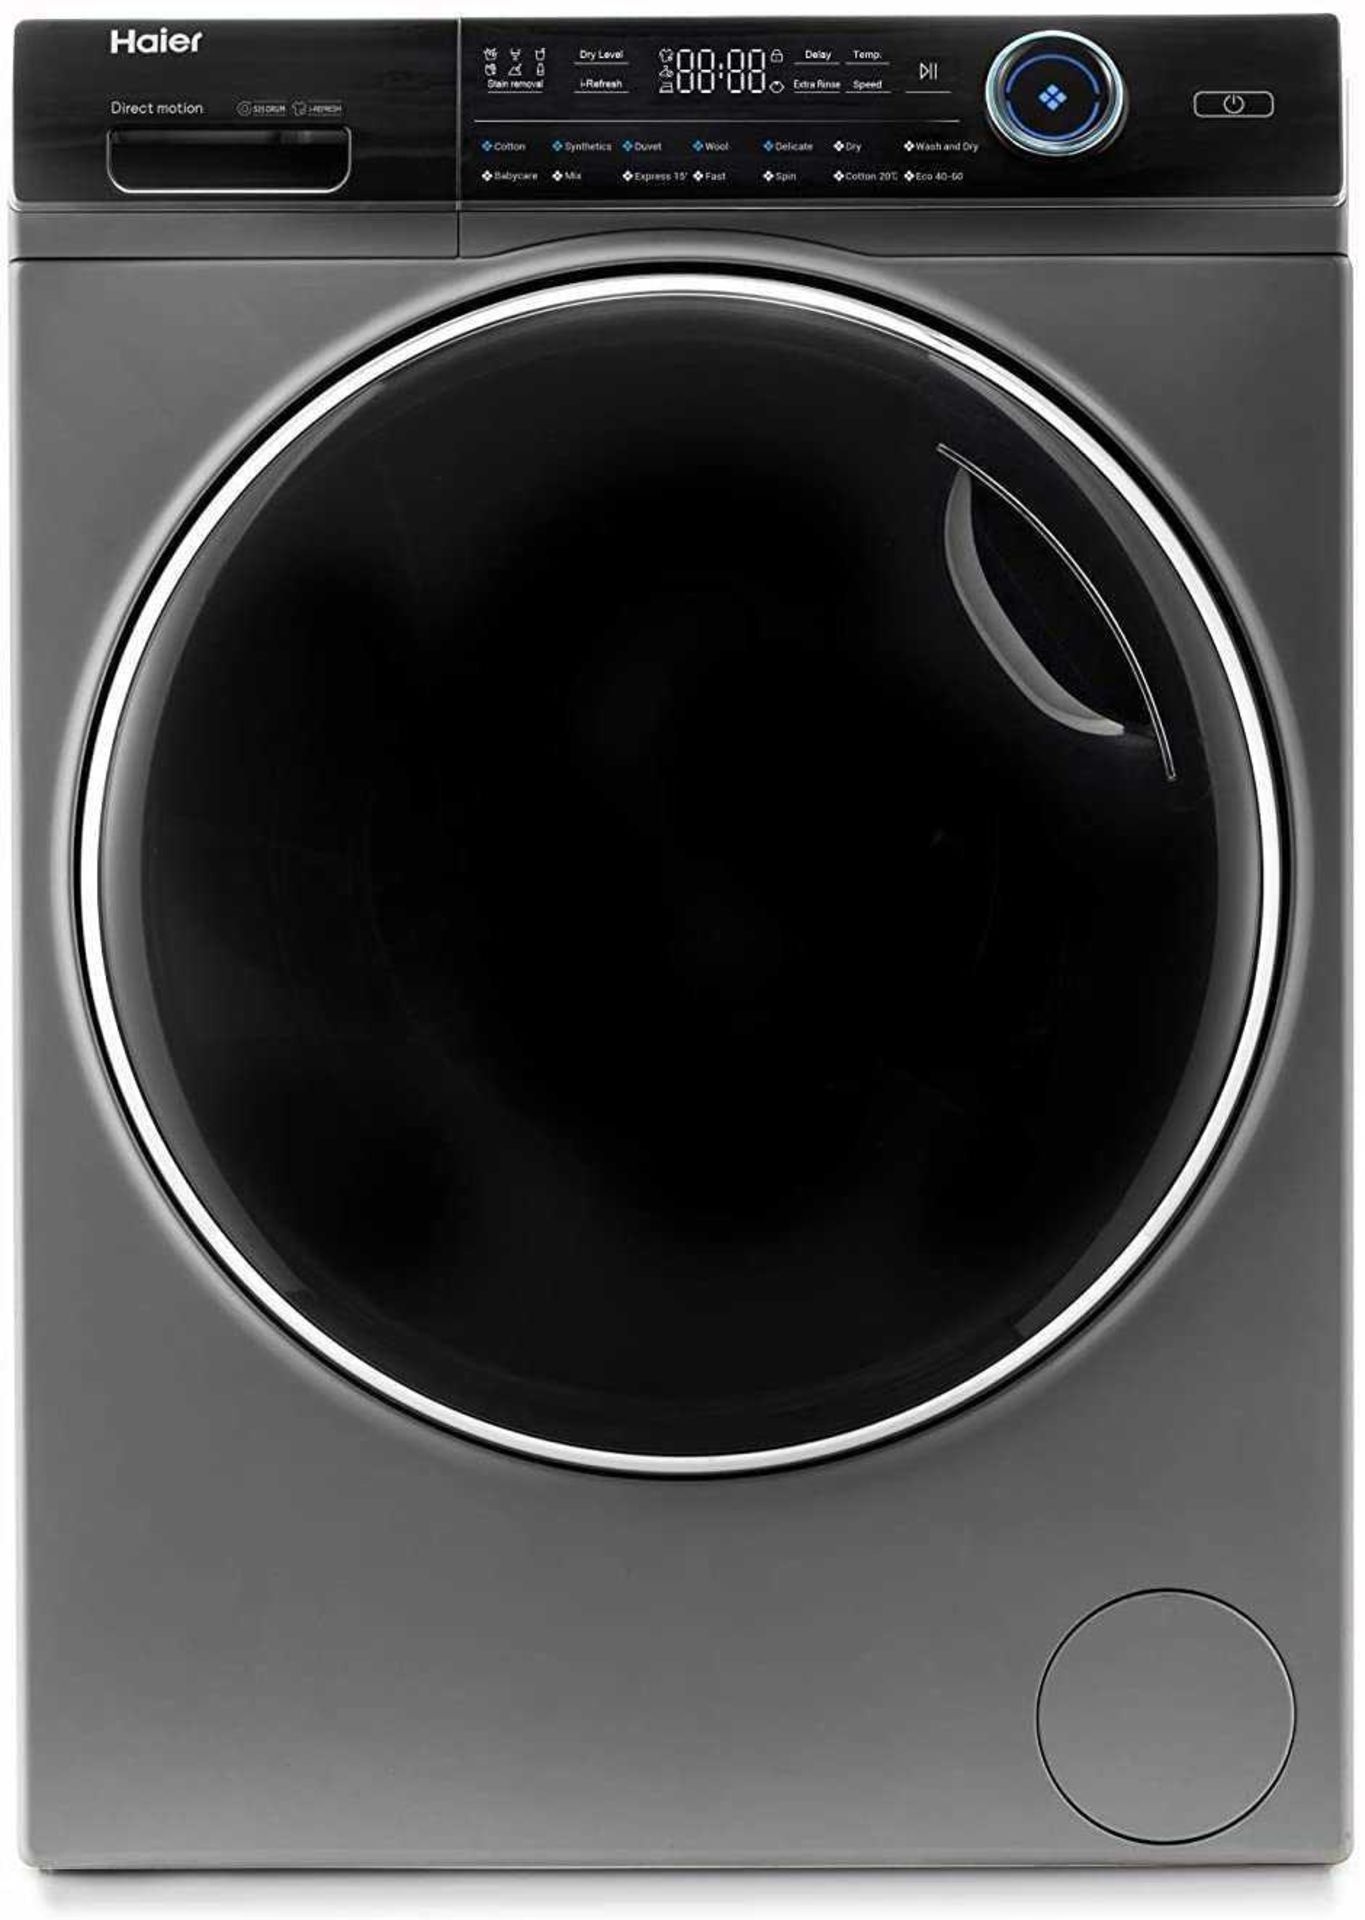 (Sp) RRP £500 Lot To Contain 1 Haier Hwd80-B14979S 8Kg / 5Kg Washer Dryer With 1400 Rpm - Graphite